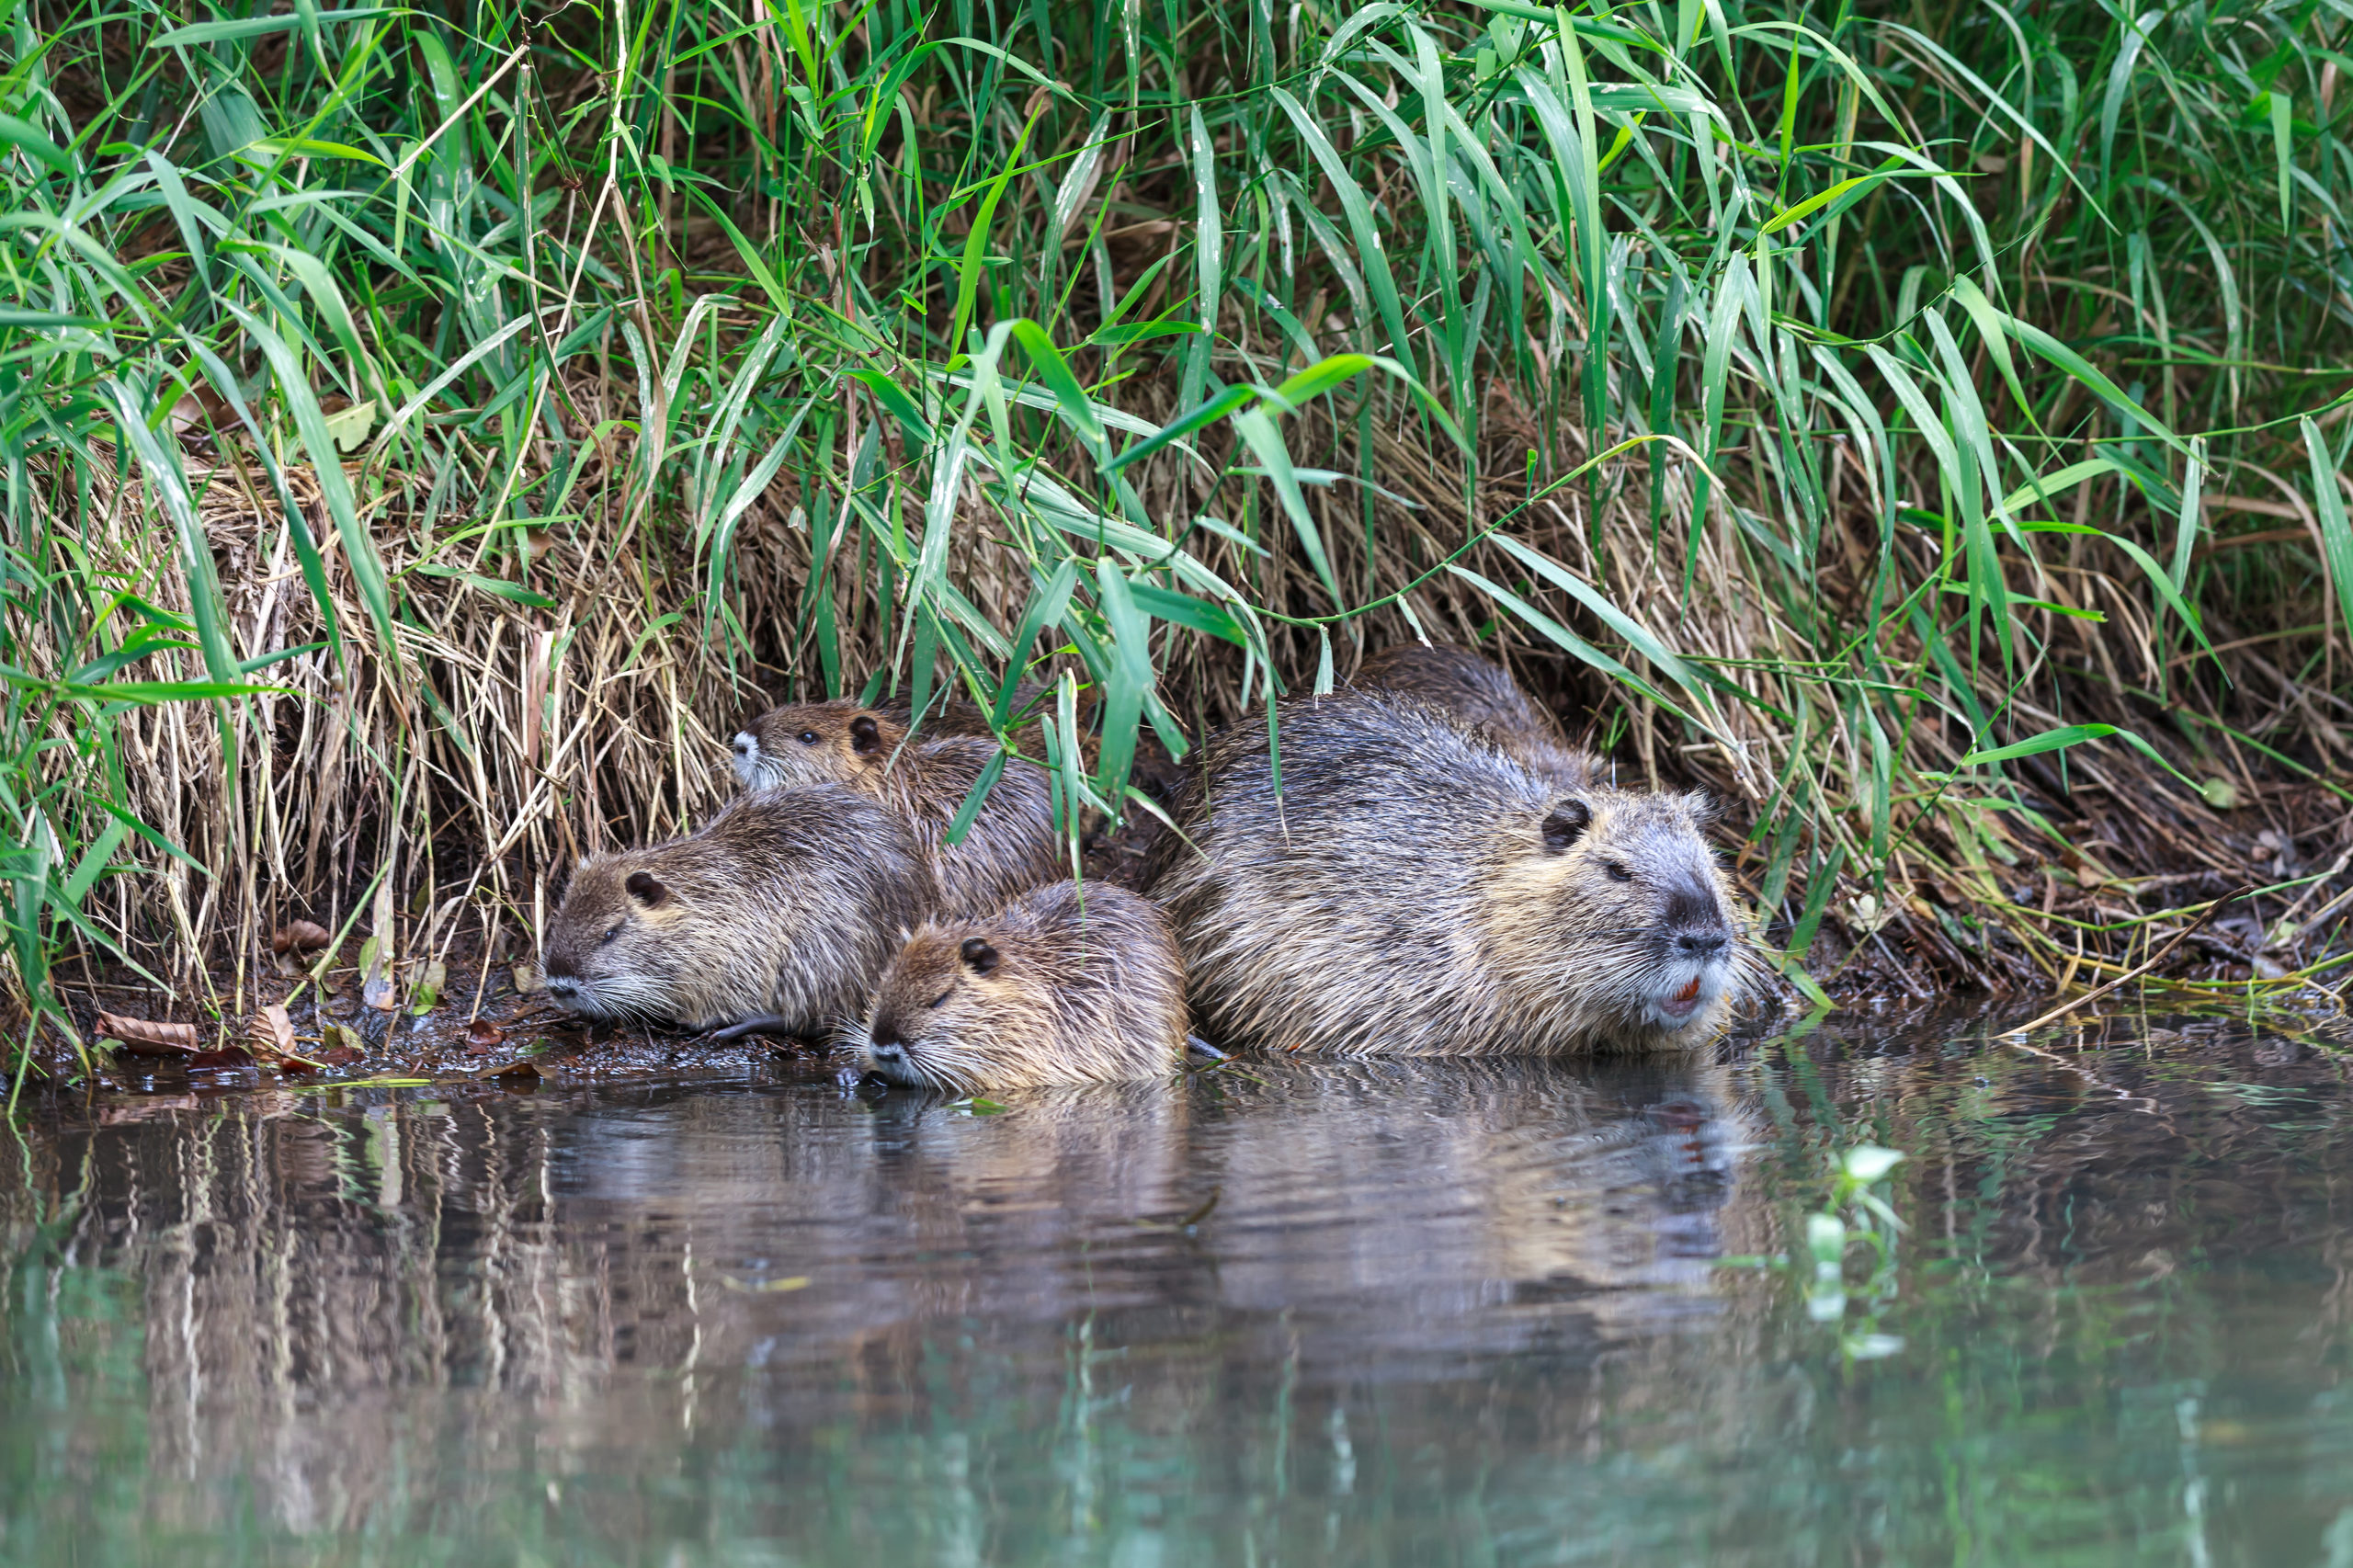 Beaver family sitting under grass in water